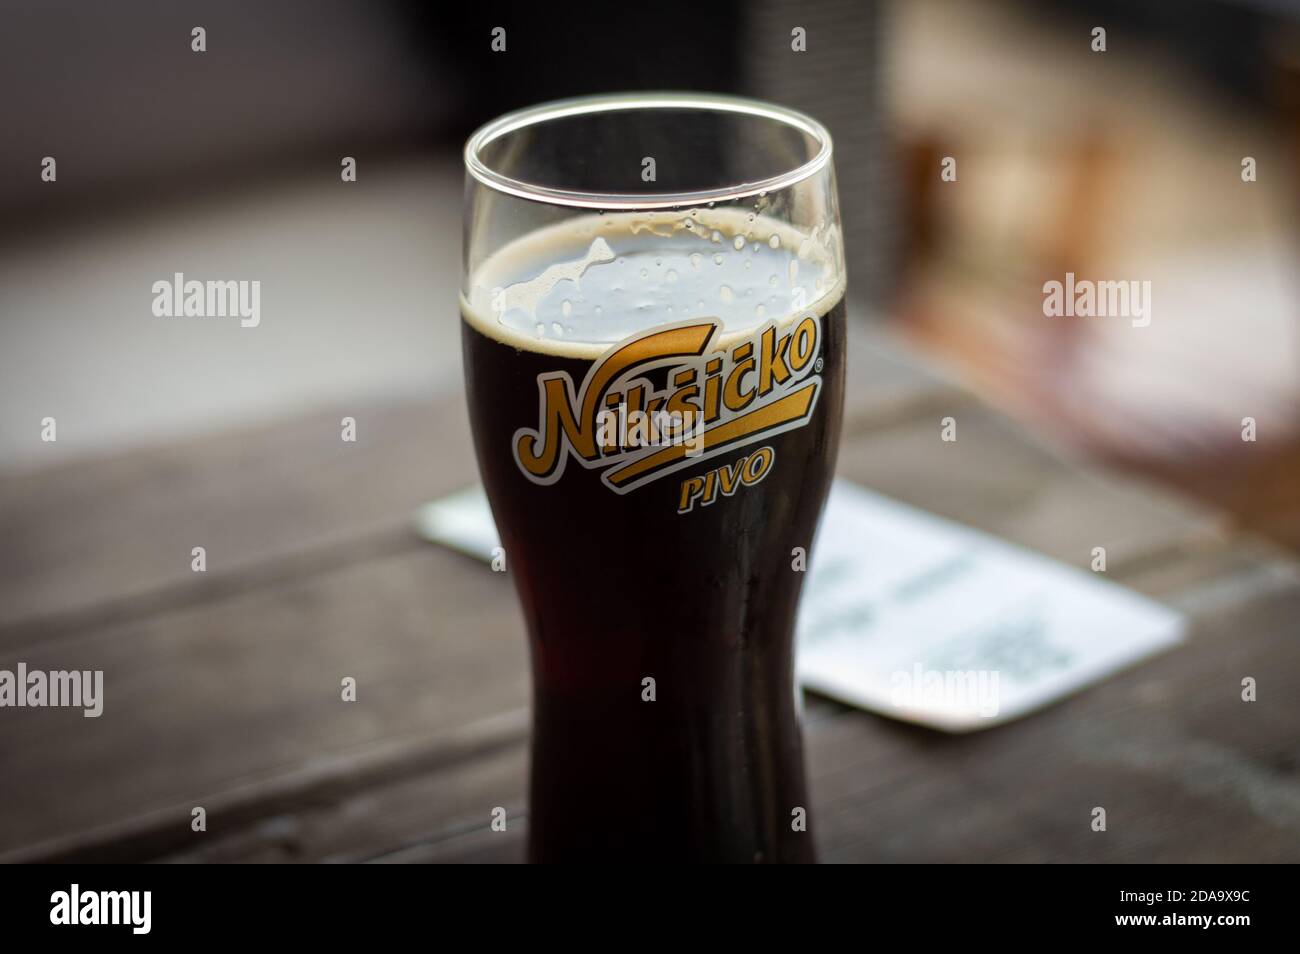 Belgrade / Serbia - May 13, 2015: A glass of cold Niksic Dark Beer, served in a restaurant in Belgrade, Serbia Stock Photo